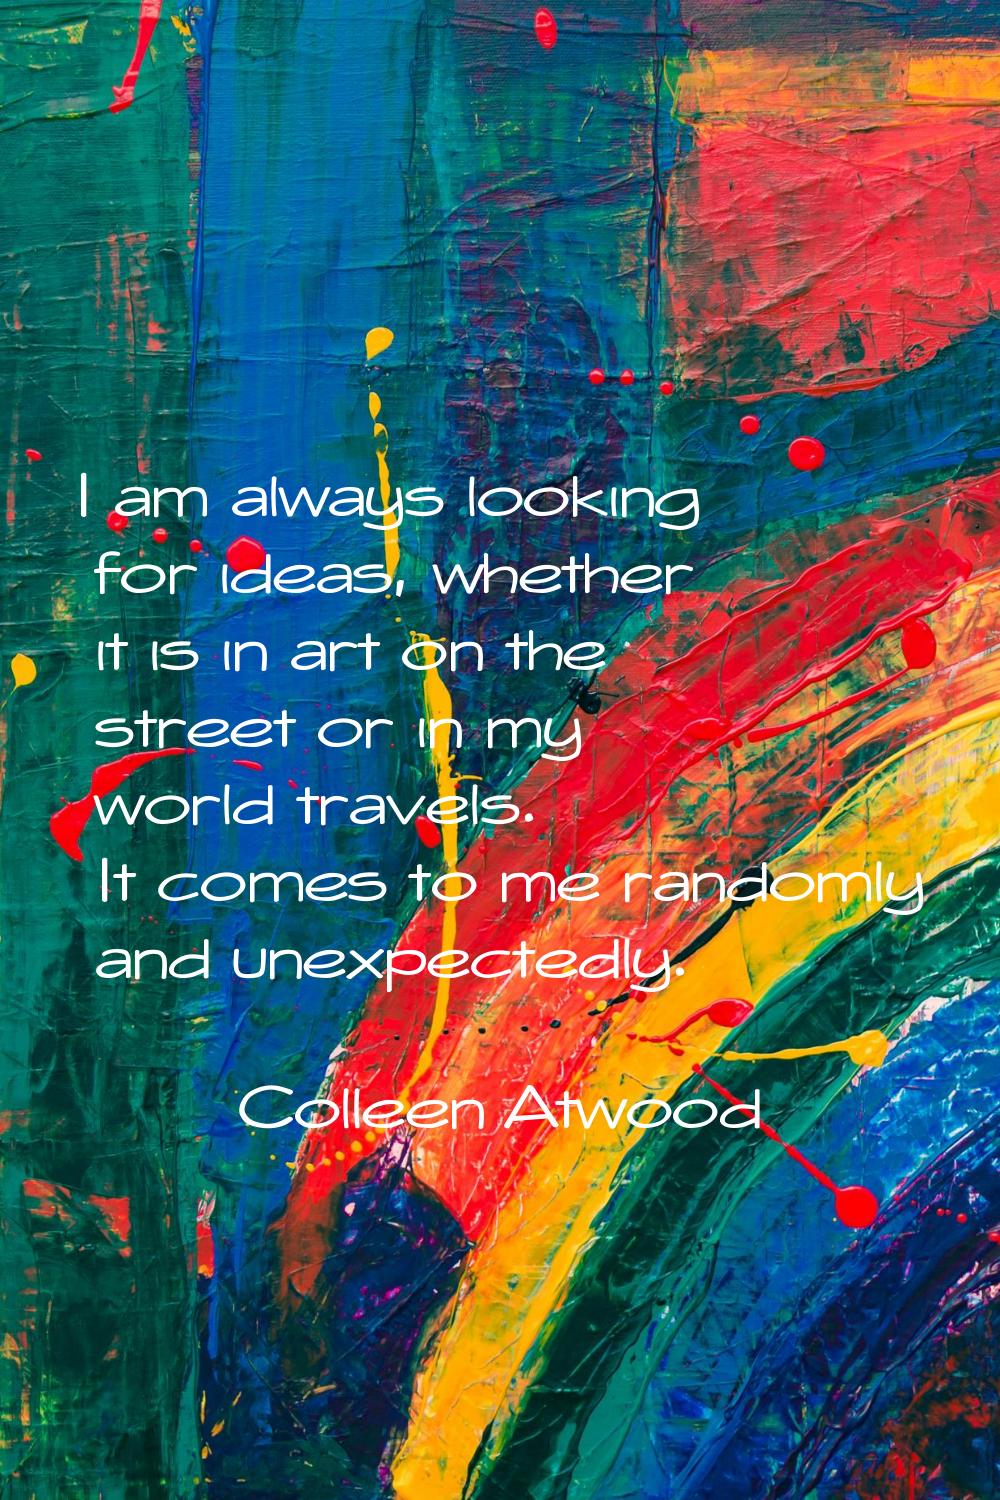 I am always looking for ideas, whether it is in art on the street or in my world travels. It comes 